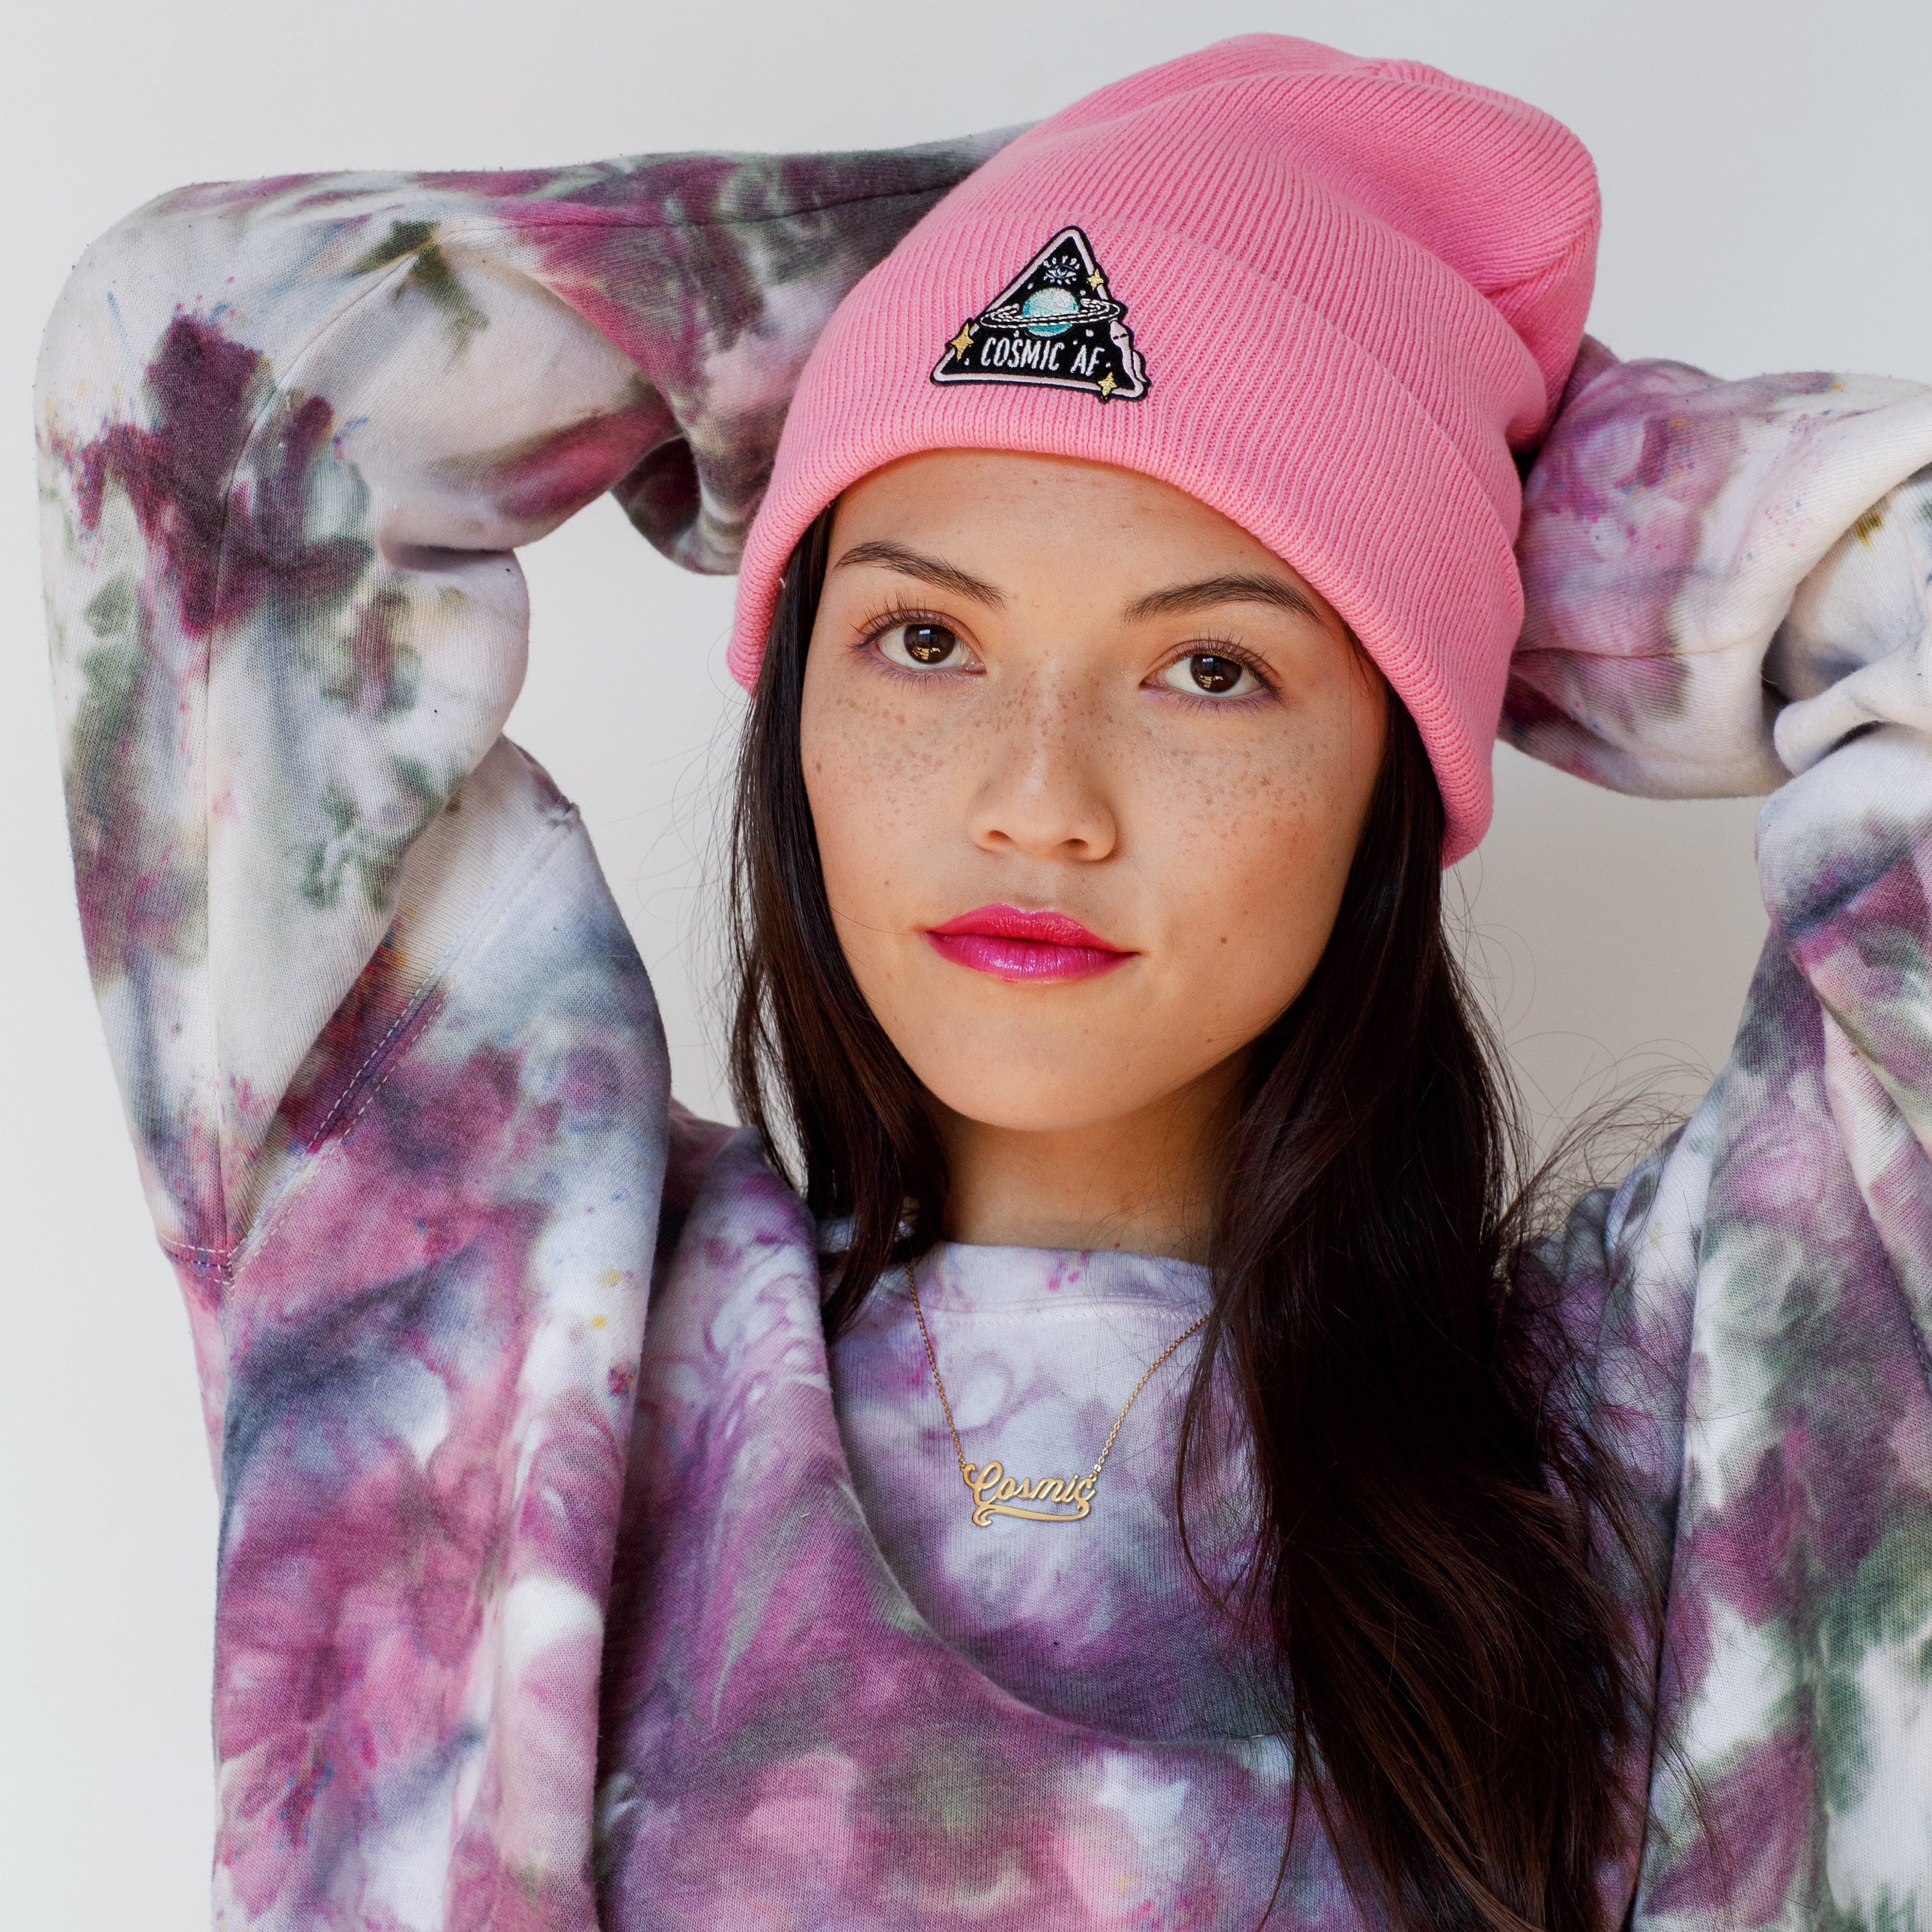 designer patched beanies — reworked vintage clothing and much more!